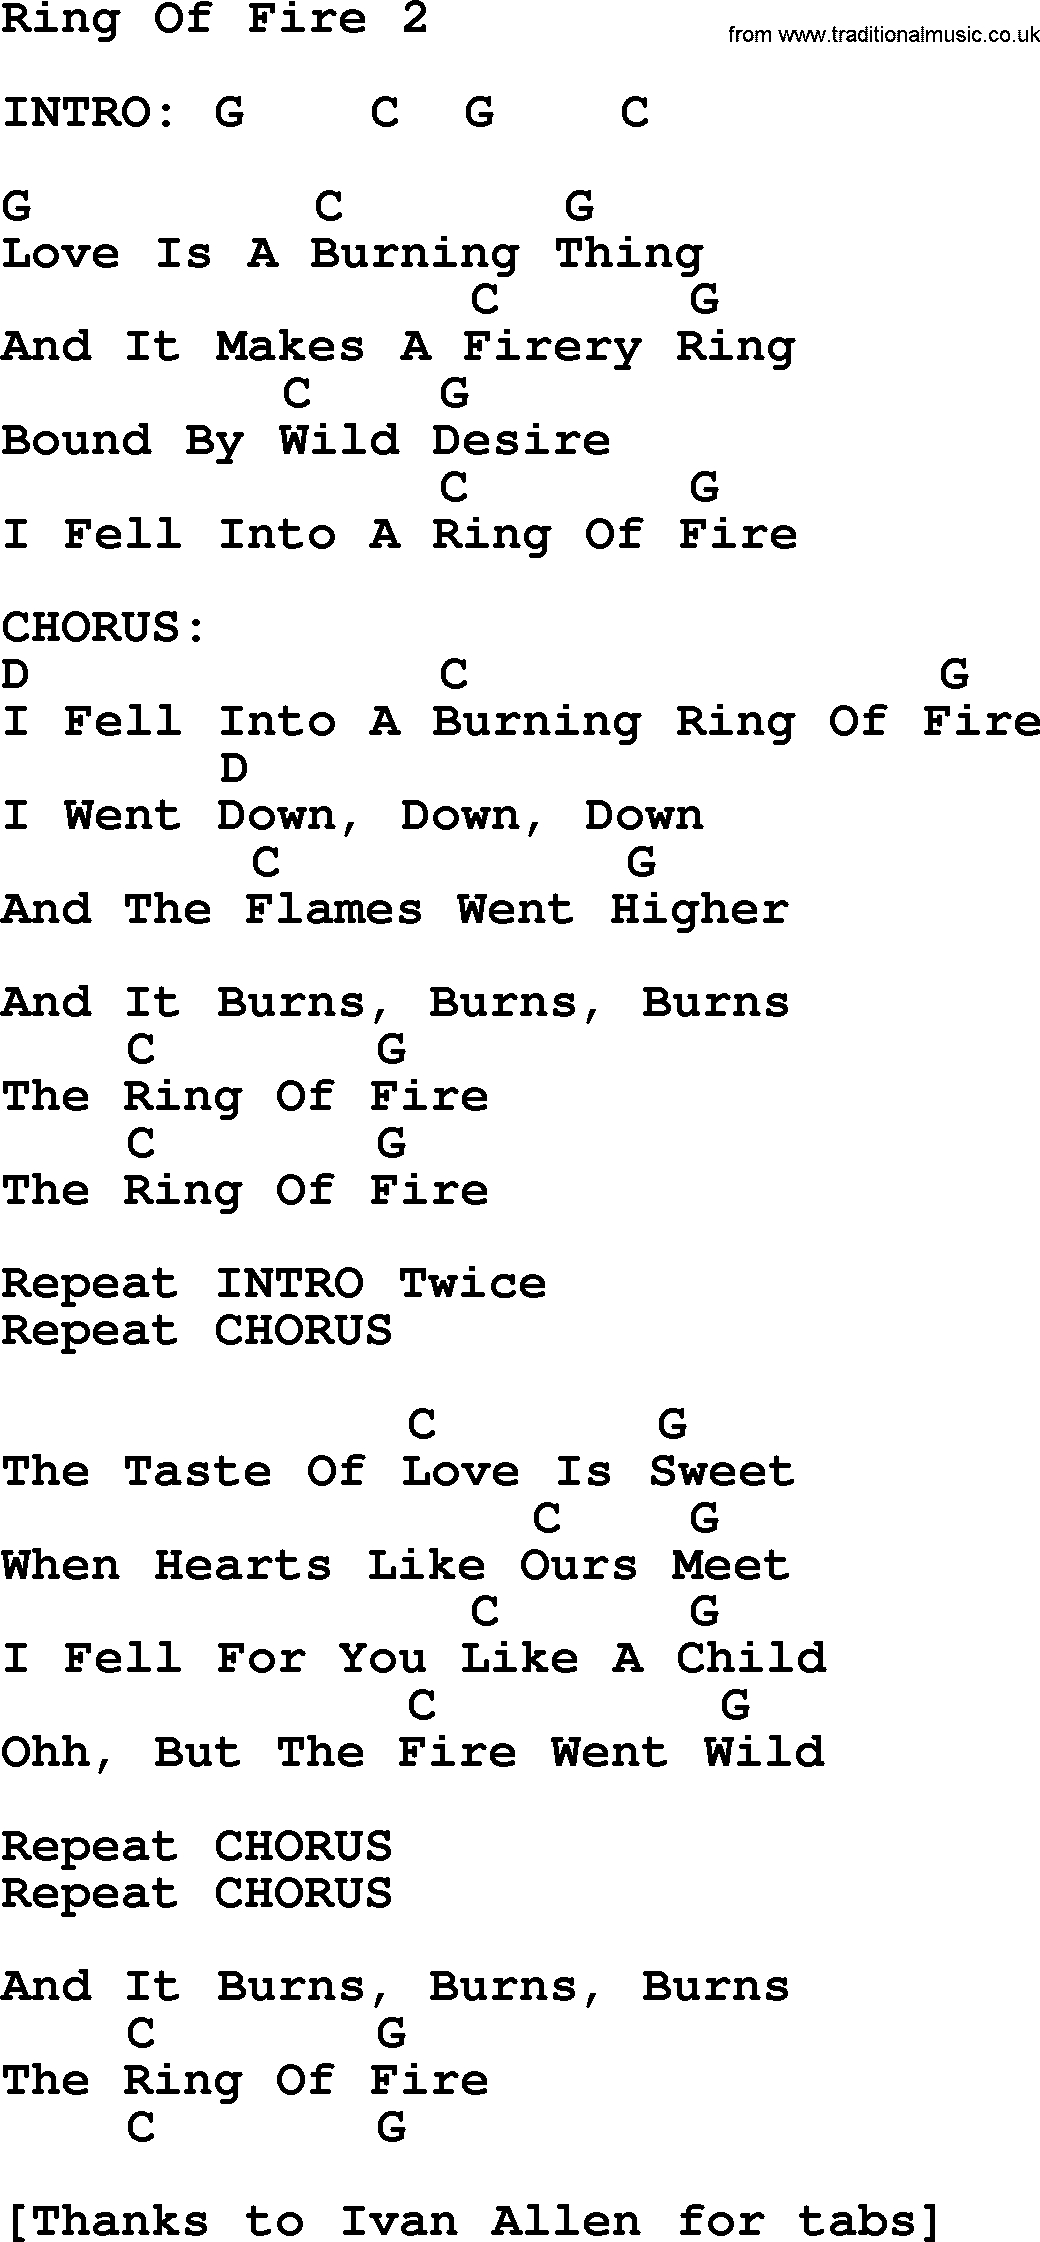 Ring Of Fire Chords Johnny Cash Song Ring Of Fire 2 Lyrics And Chords